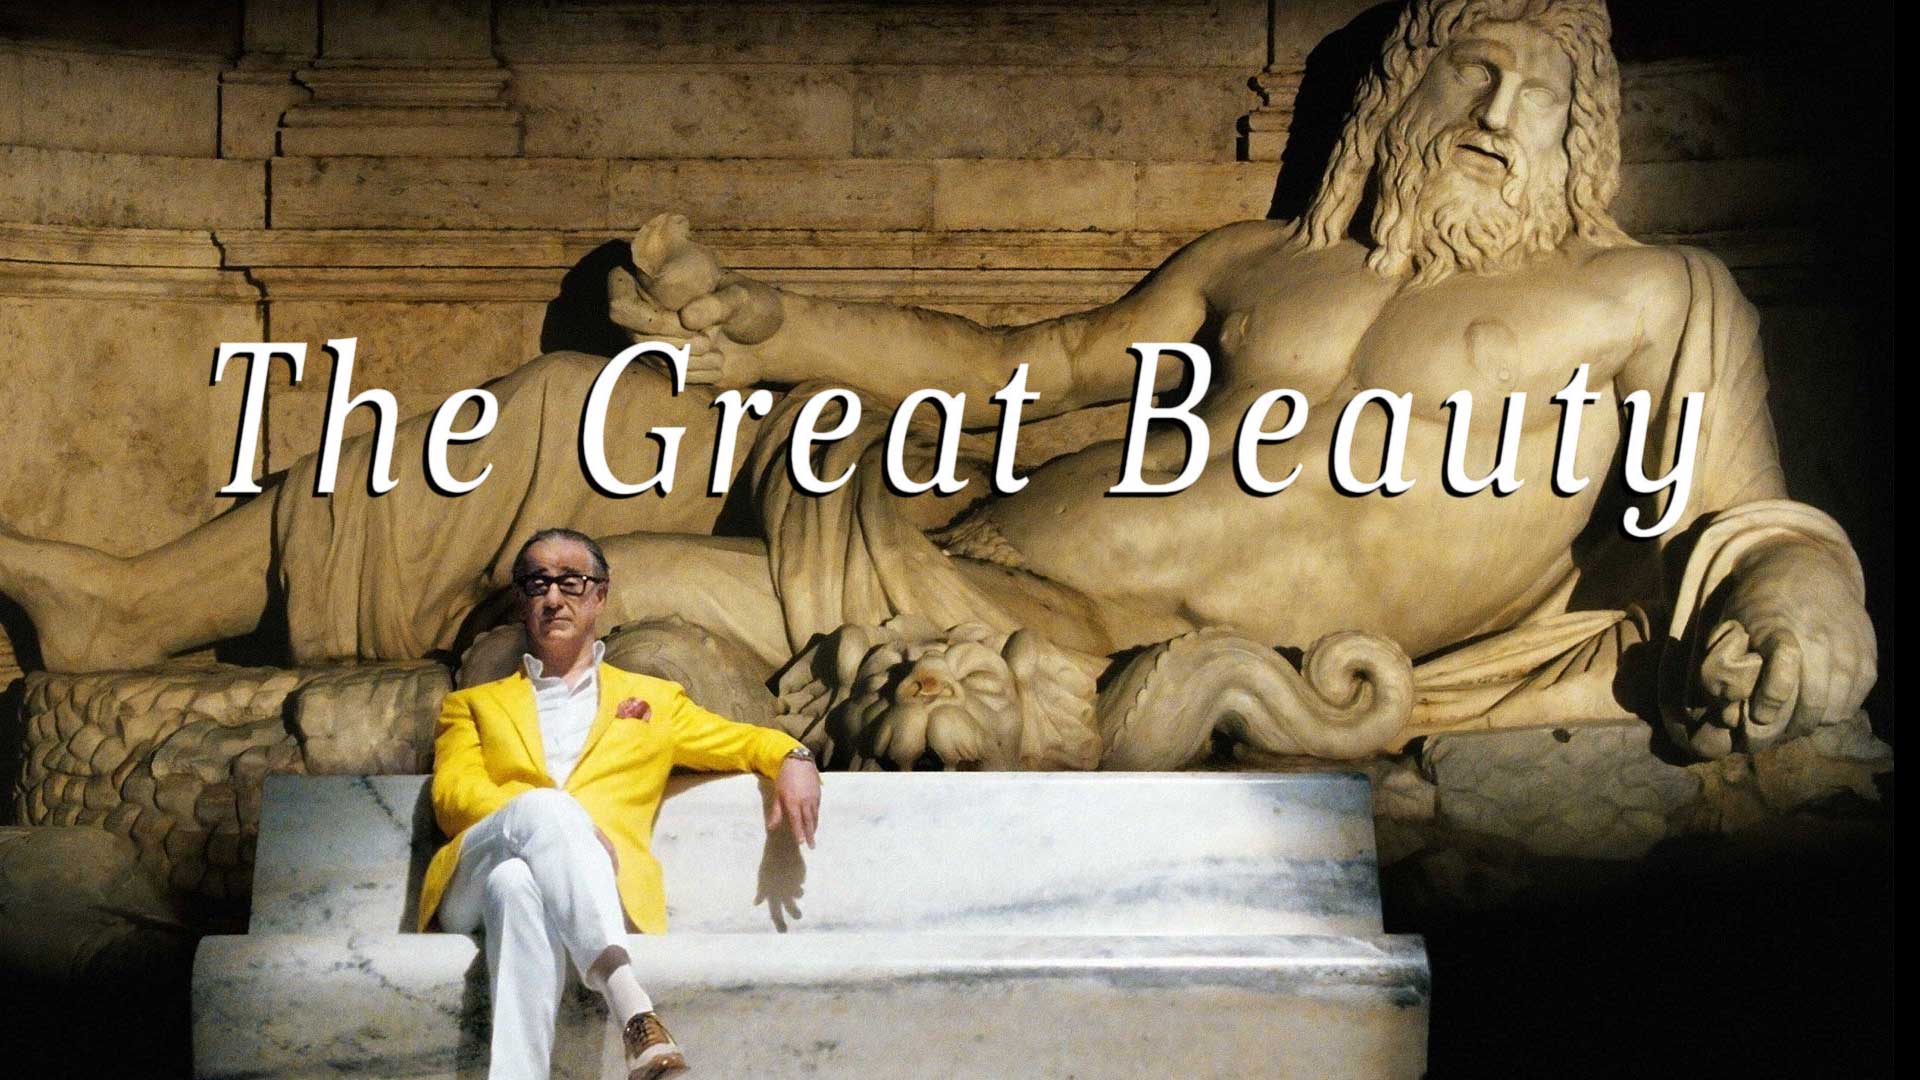 44-facts-about-the-movie-the-great-beauty